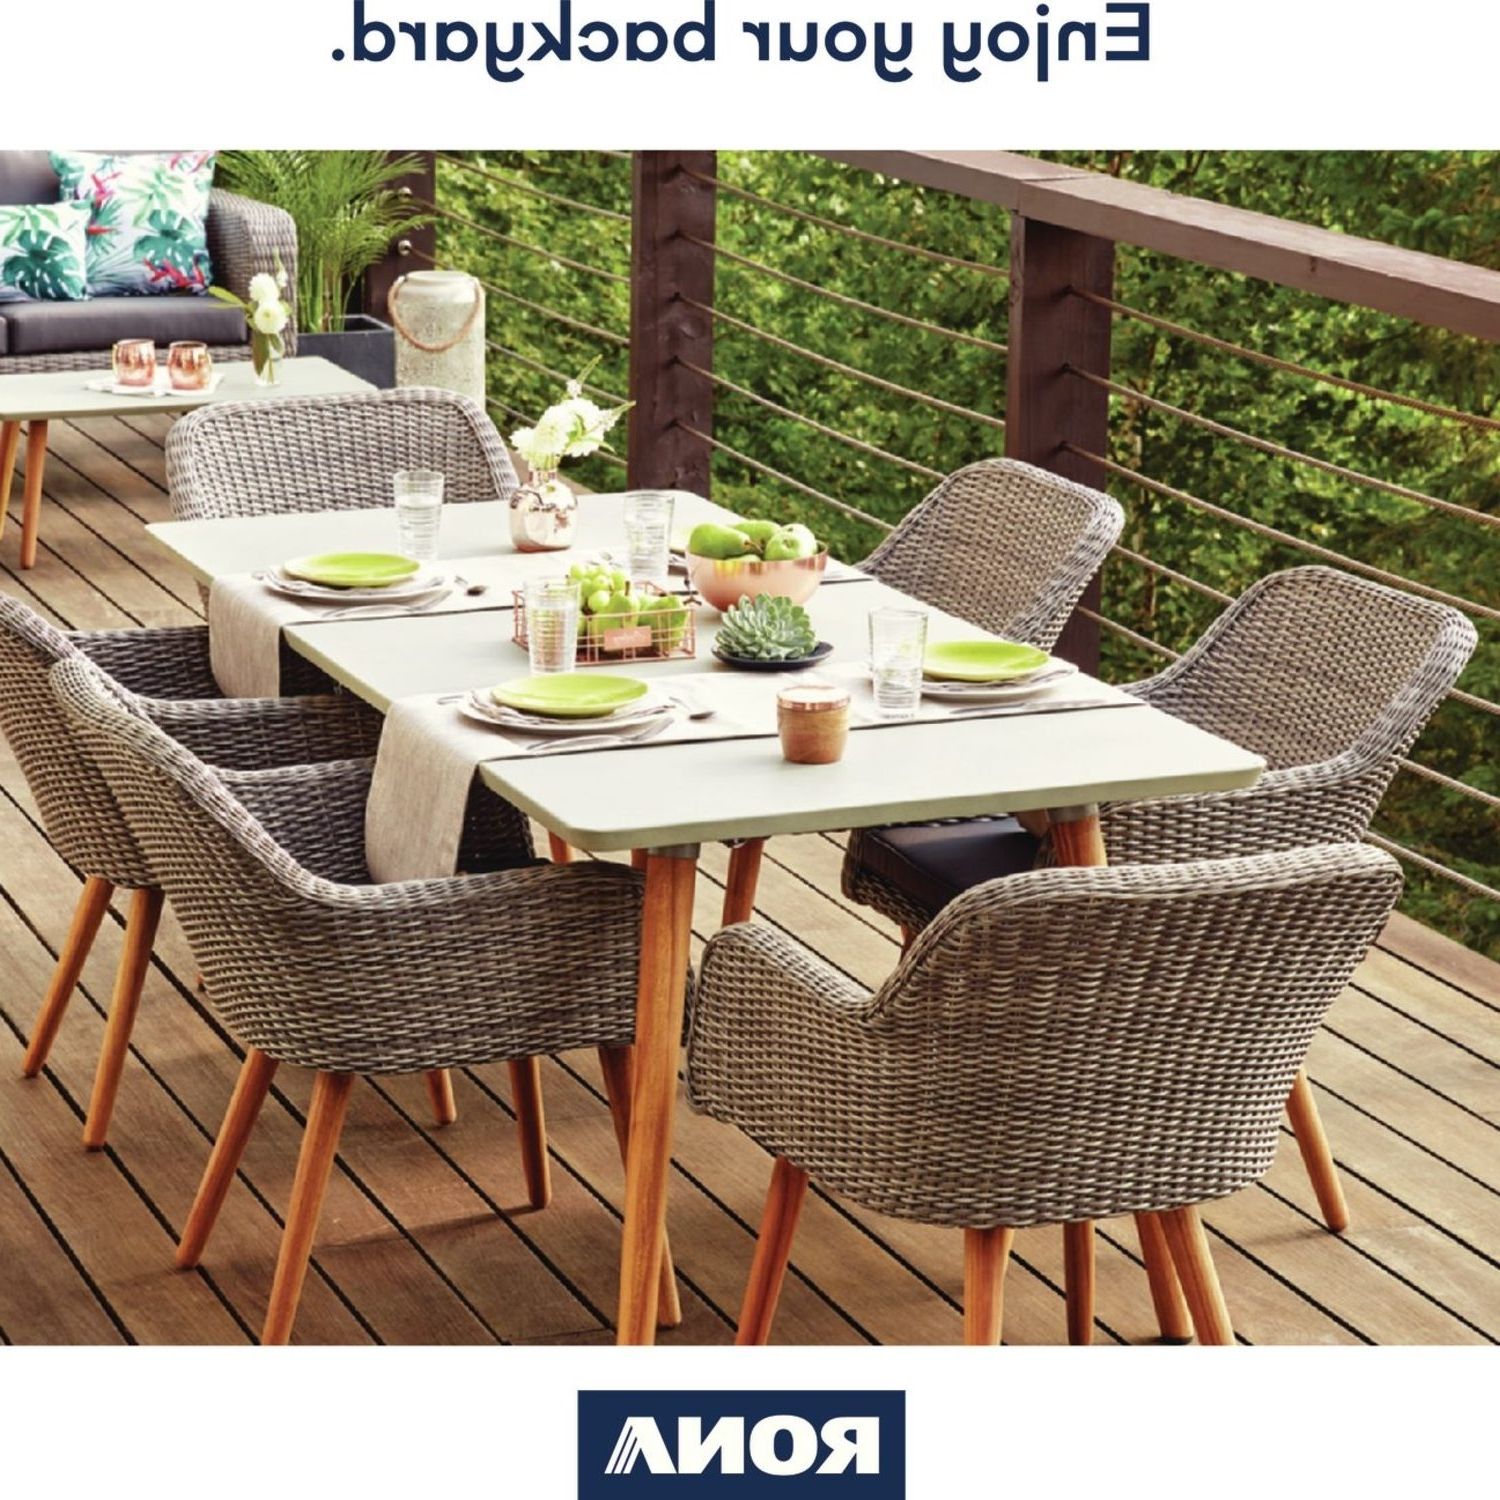 Rona Weekly Flyer – Enjoy Your Backyard – Mar 22 – Apr 25 Pertaining To Latest Rona Patio Rocking Chairs (View 1 of 20)